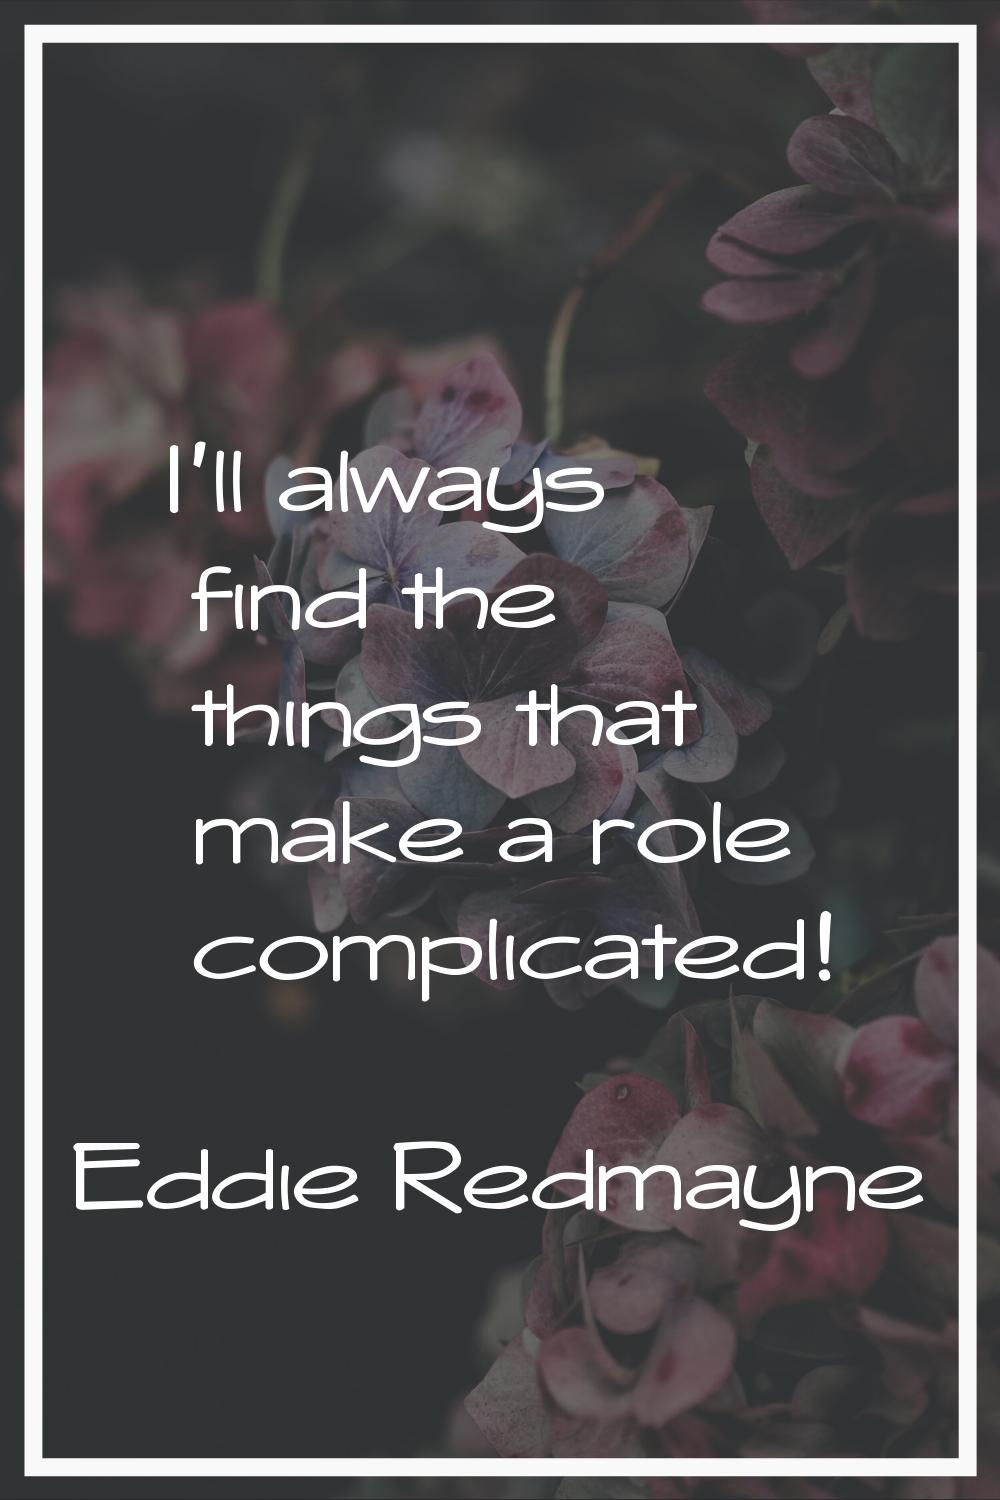 I'll always find the things that make a role complicated!